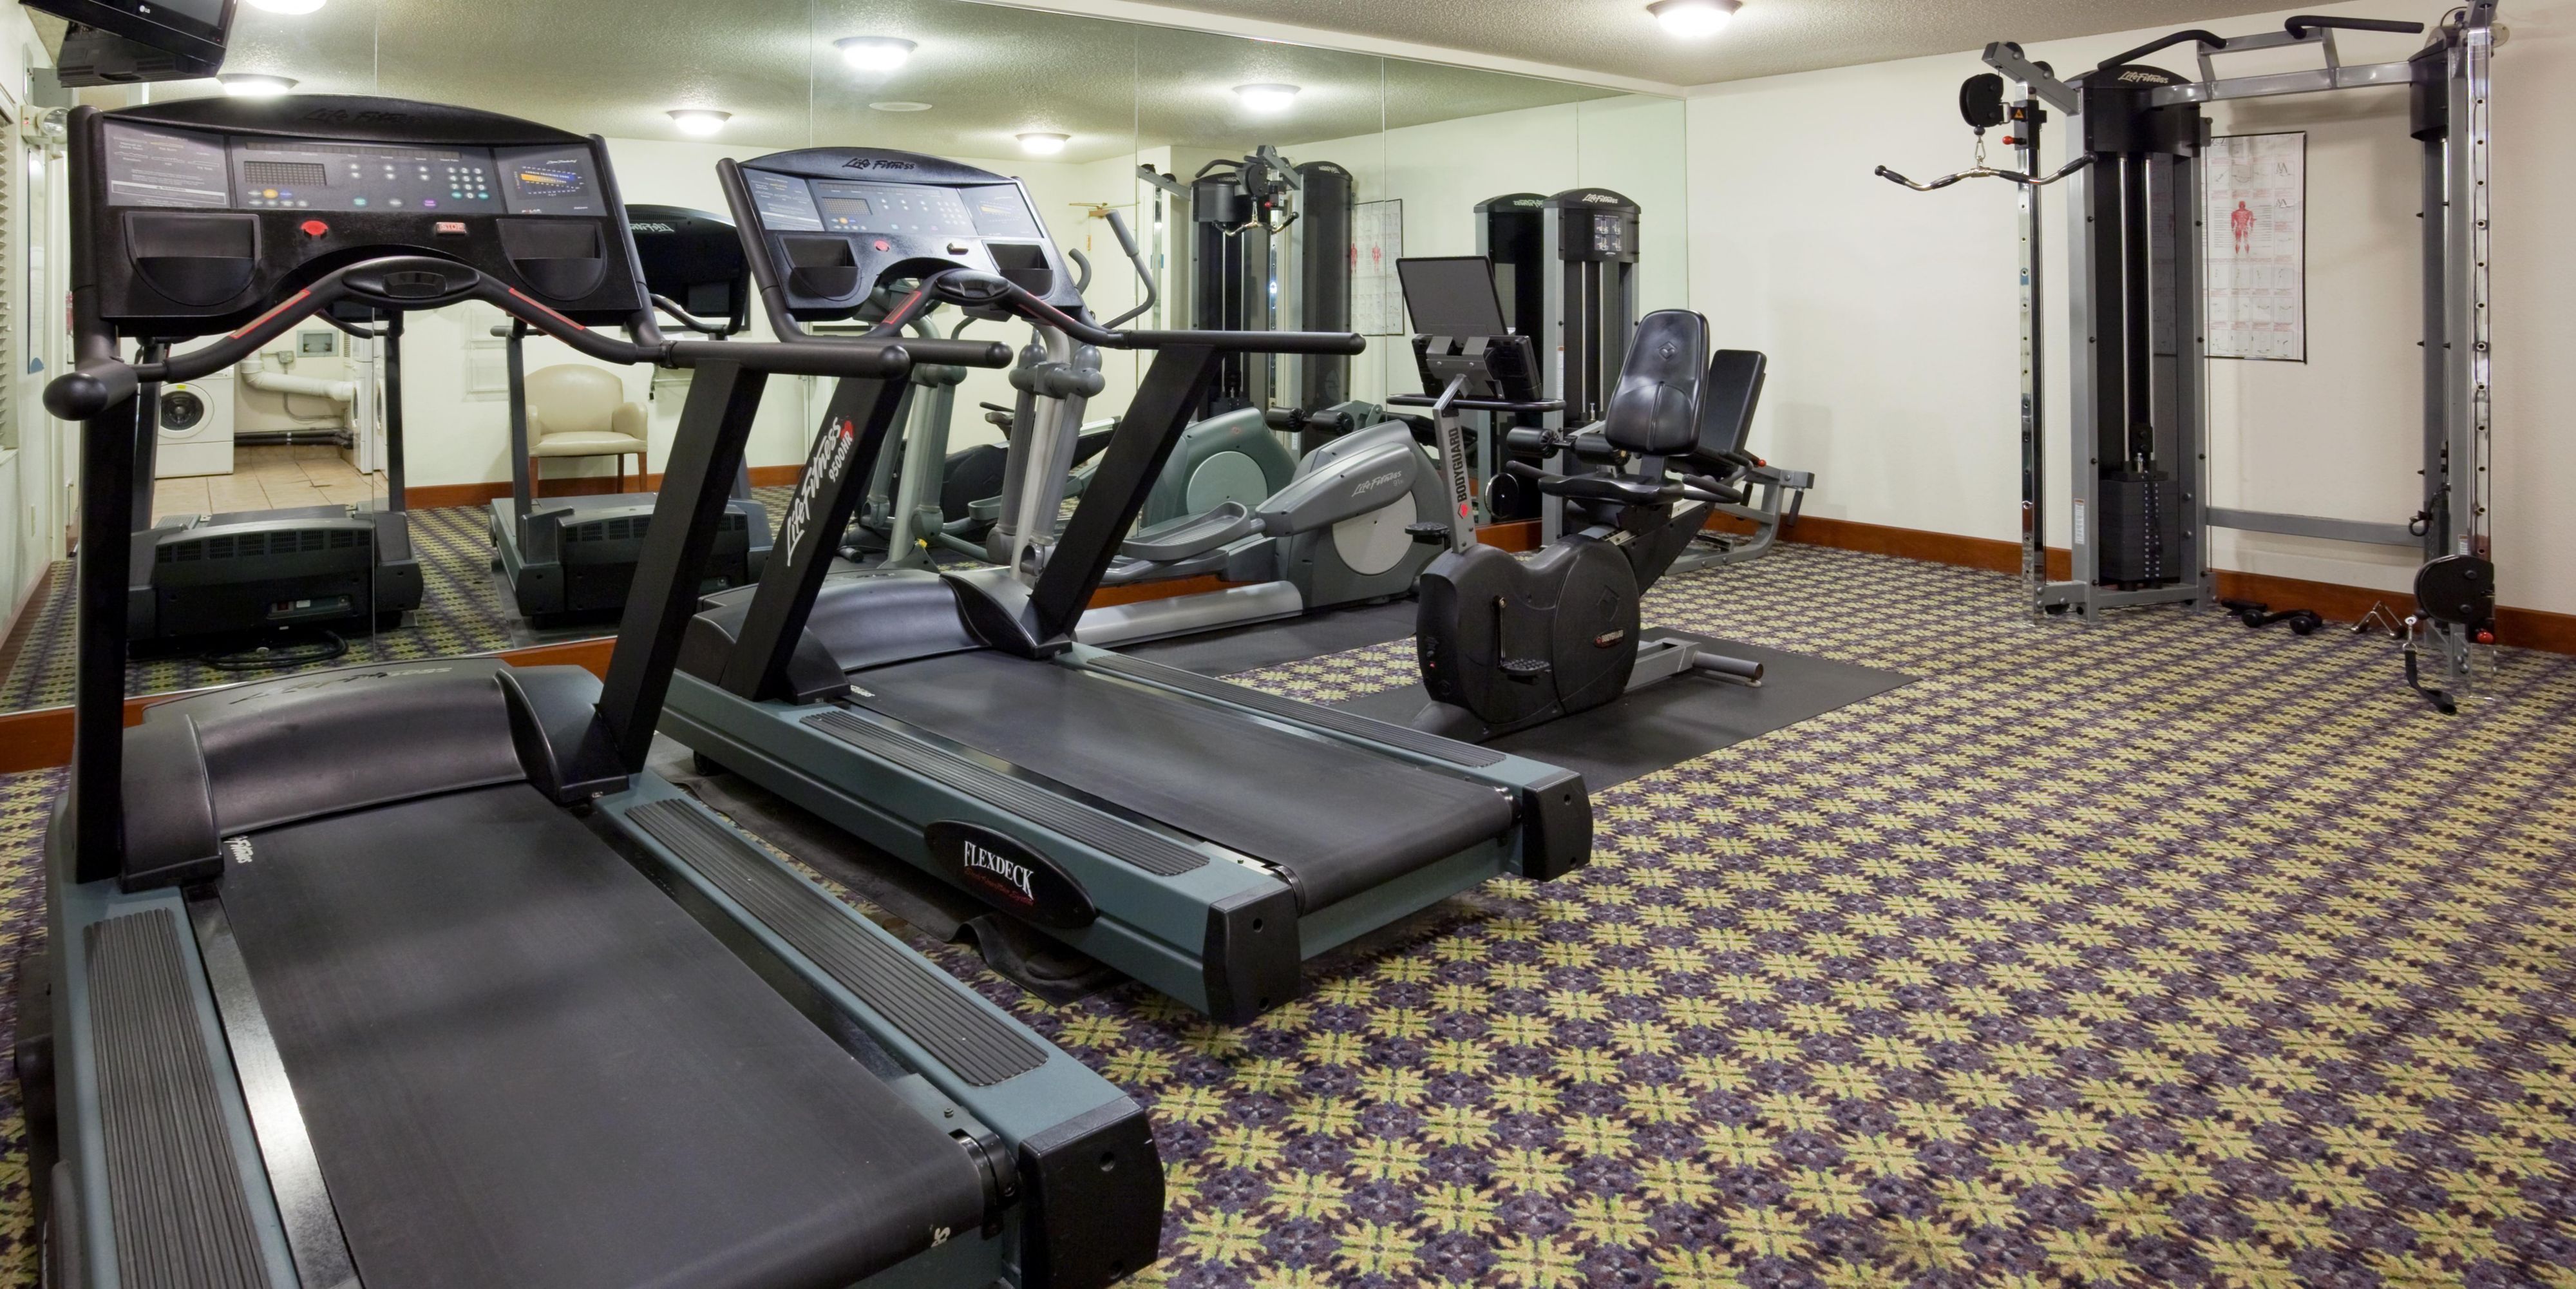 Our fitness center is open 24-hours a day.